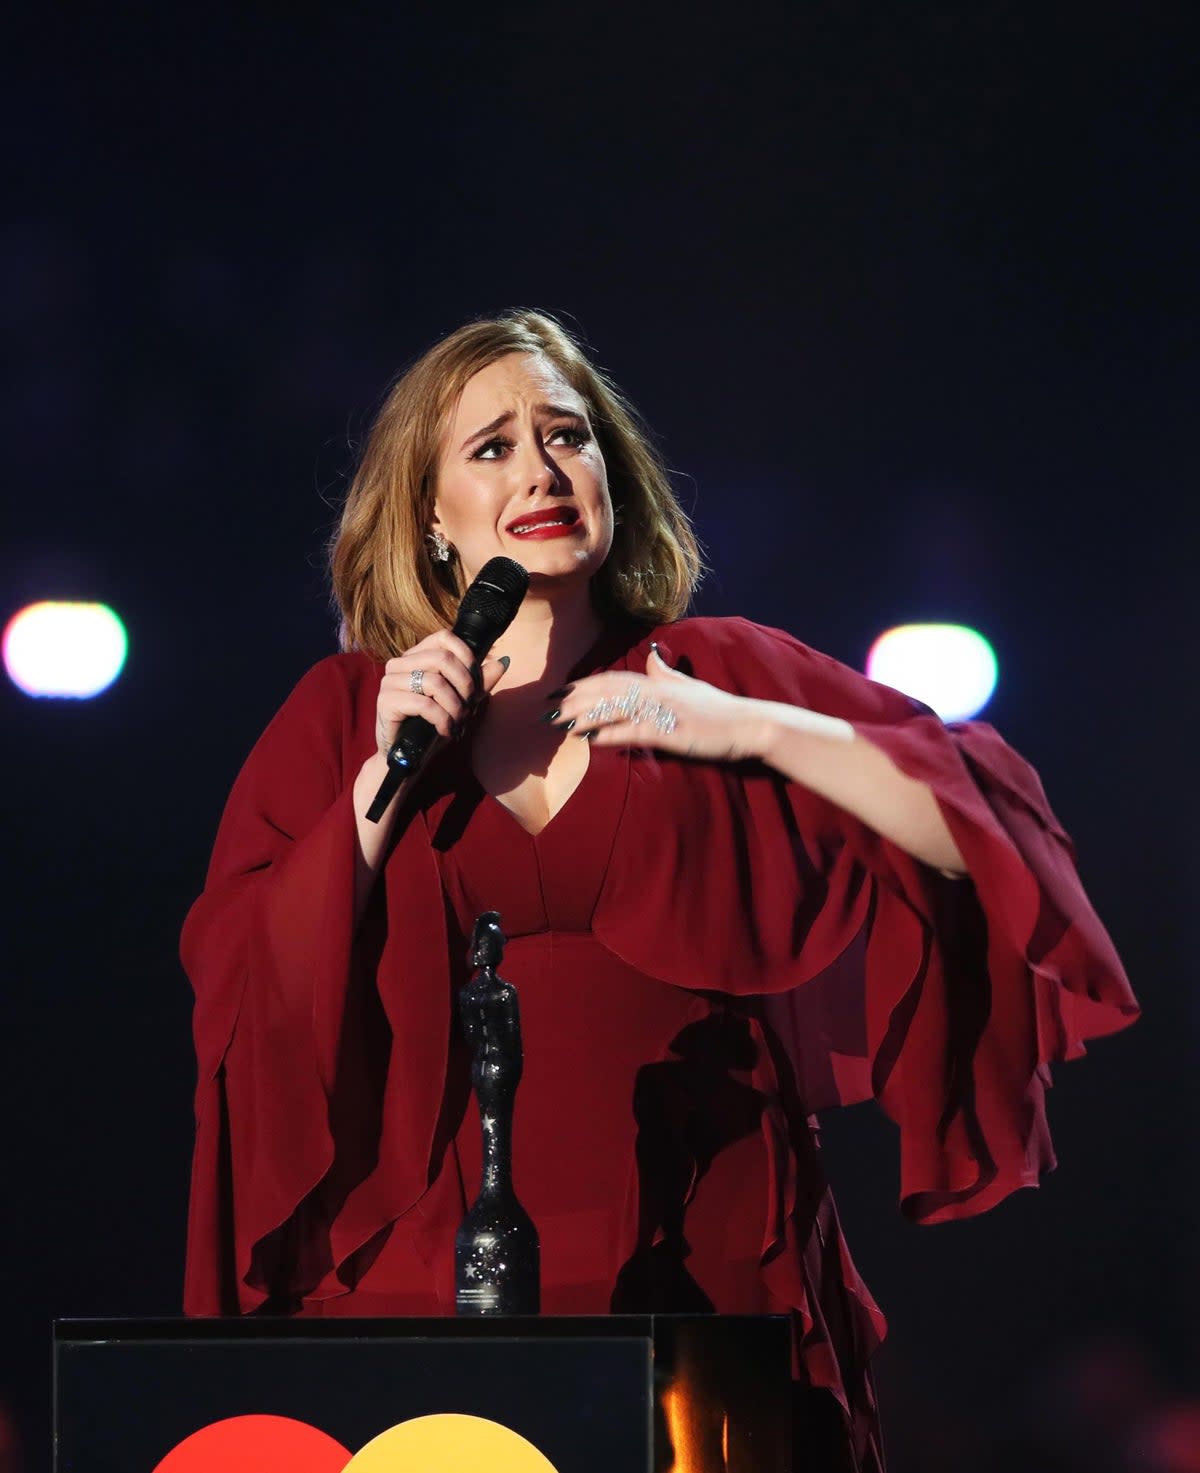 Getting emotional: Adele accepts the Global Success award at the BRIT Awards 2016 at The O2 Arena (Dave Benett)